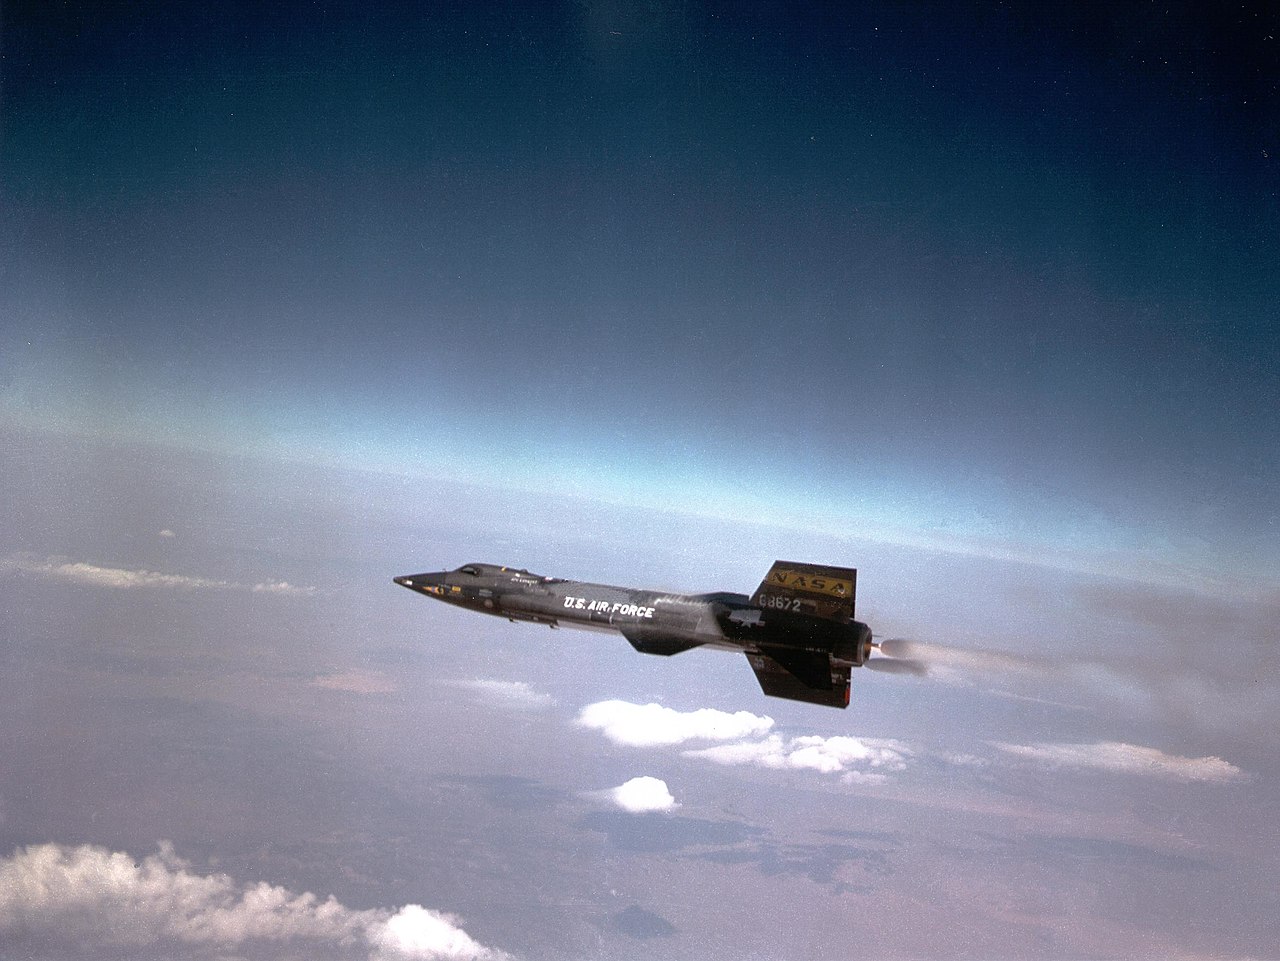 North American X-15: The Plane That Left SR-71 Blackbird In The Dust